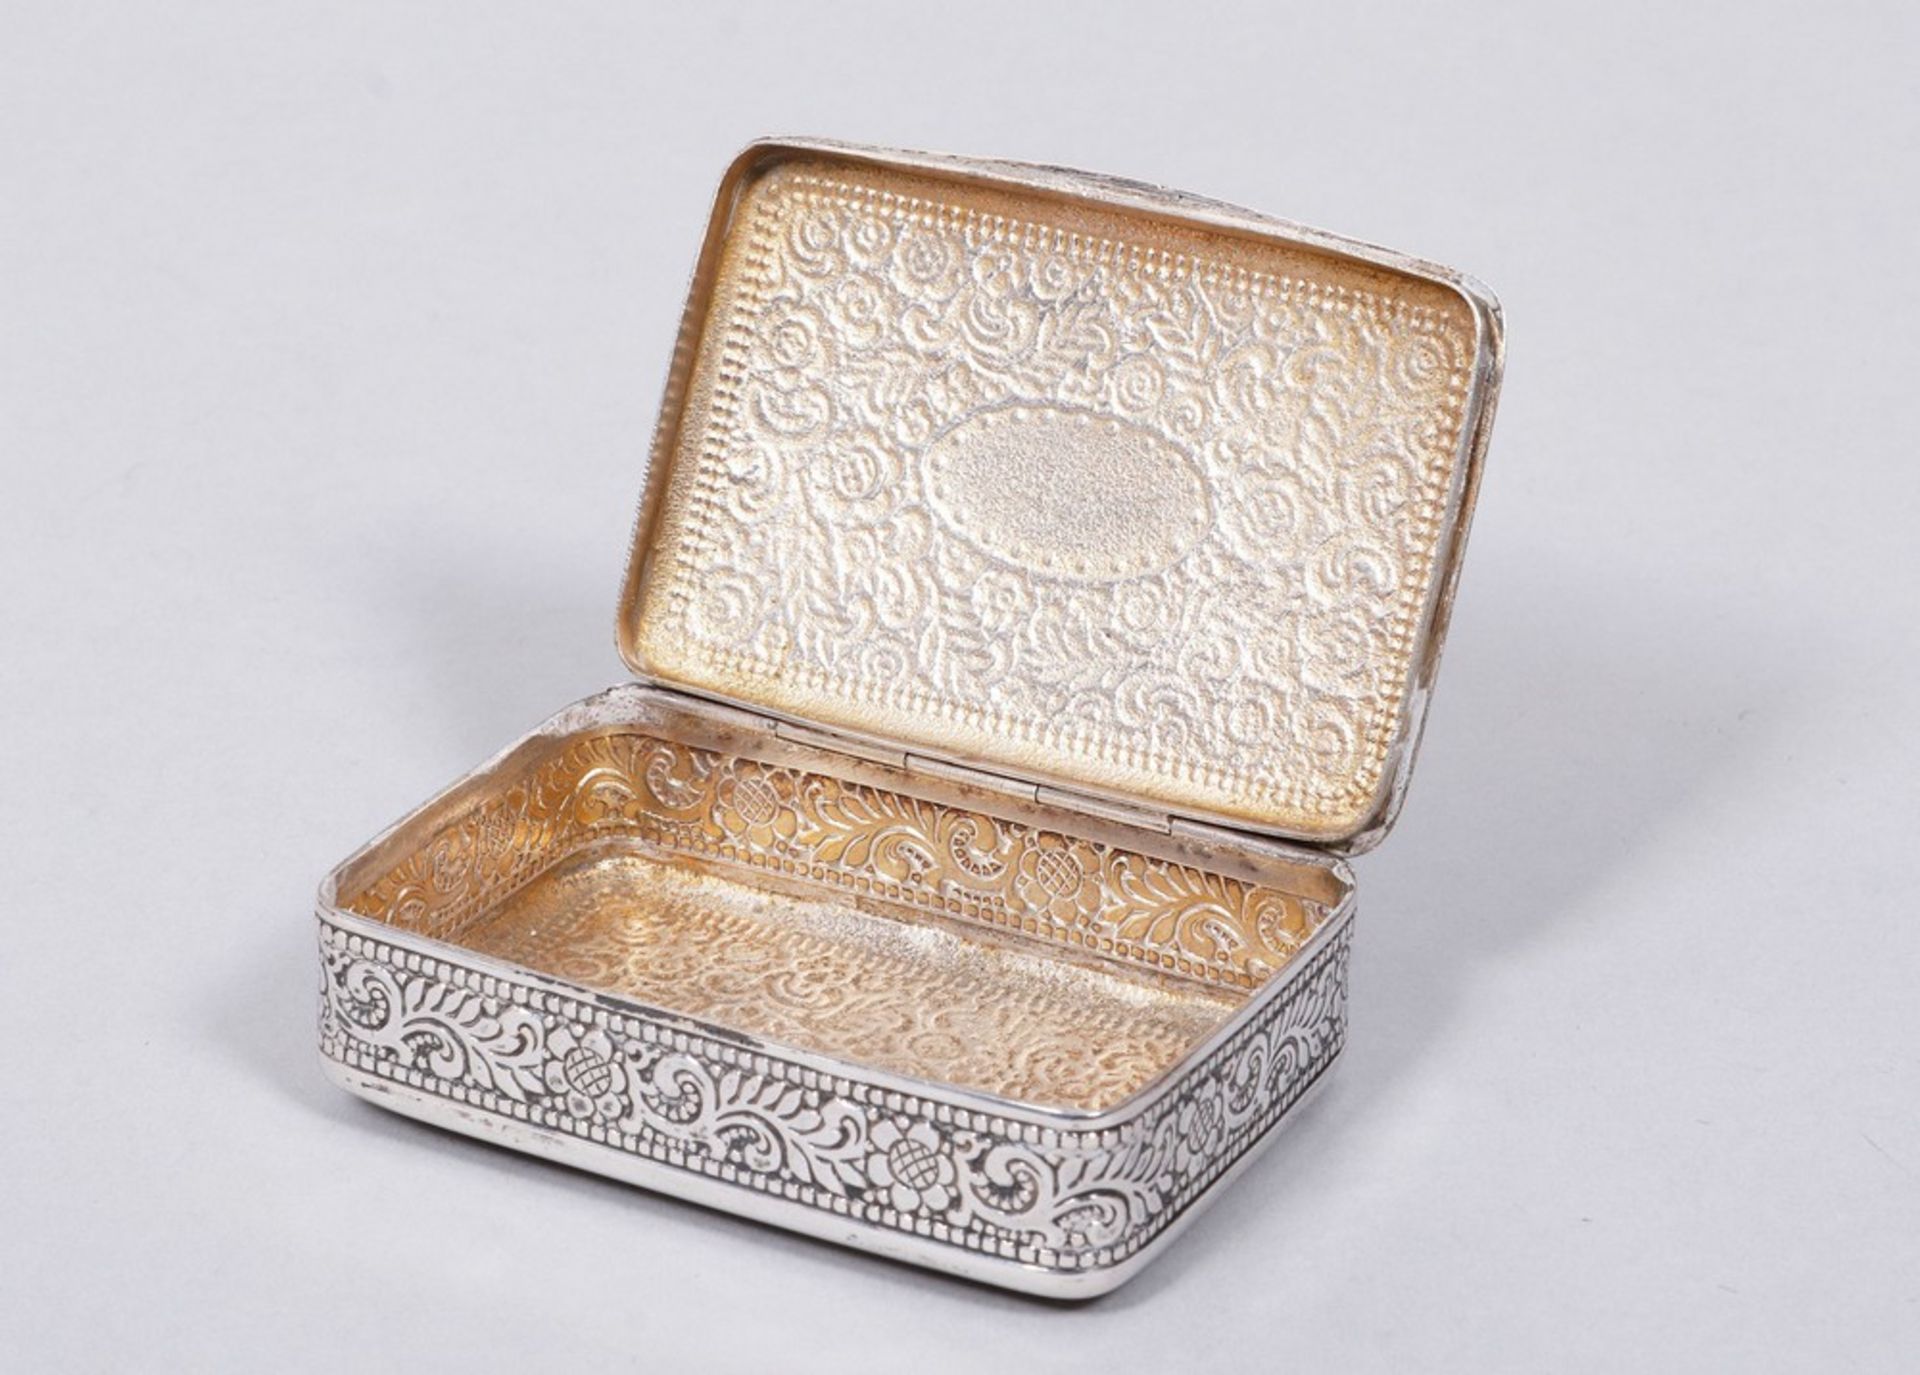 Small lidded box, 800 silver, partially gilt, German, early 20th C. - Image 3 of 4